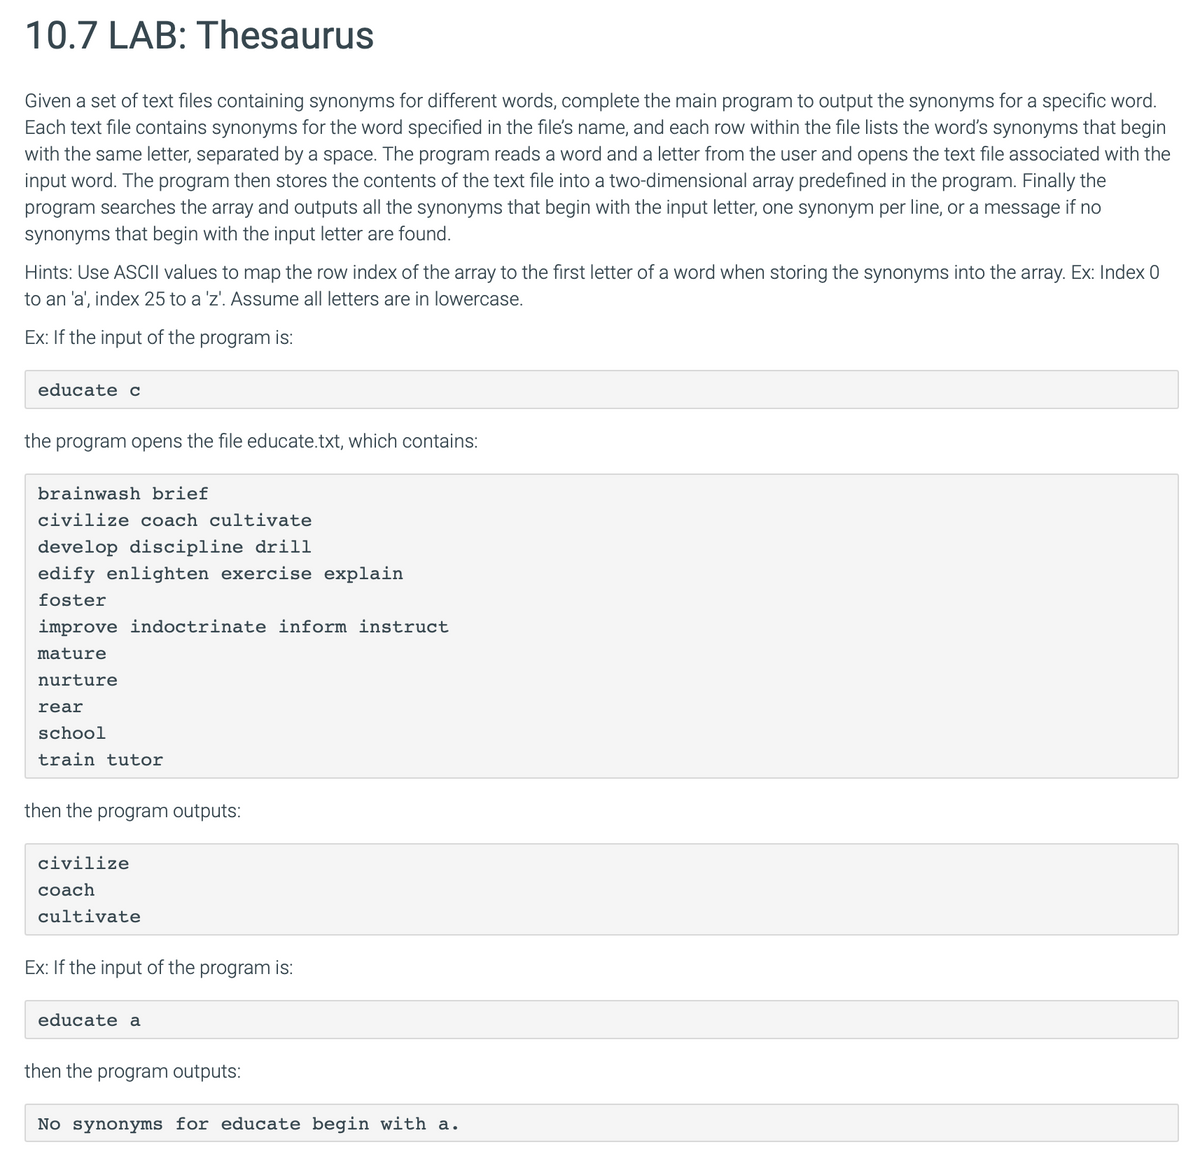 10.7 LAB: Thesaurus
Given a set of text files containing synonyms for different words, complete the main program to output the synonyms for a specific word.
Each text file contains synonyms for the word specified in the file's name, and each row within the file lists the word's synonyms that begin
with the same letter, separated by a space. The program reads a word and a letter from the user and opens the text file associated with the
input word. The program then stores the contents of the text file into a two-dimensional array predefined in the program. Finally the
program searches the array and outputs all the synonyms that begin with the input letter, one synonym per line, or a message if no
synonyms that begin with the input letter are found.
Hints: Use ASCII values to map the row index of the array to the first letter of a word when storing the synonyms into the array. Ex: Index 0
to an 'a', index 25 to a 'z'. Assume all letters are in lowercase.
Ex: If the input of the program is:
educate c
the program opens the file educate.txt, which contains:
brainwash brief
civilize coach cultivate
develop discipline drill
edify enlighten exercise explain
foster
improve indoctrinate inform instruct
mature
nurture
rear
school
train tutor
then the program outputs:
civilize
coach
cultivate
Ex: If the input of the program is:
educate a
then the program outputs:
No synonyms for educate begin with a.